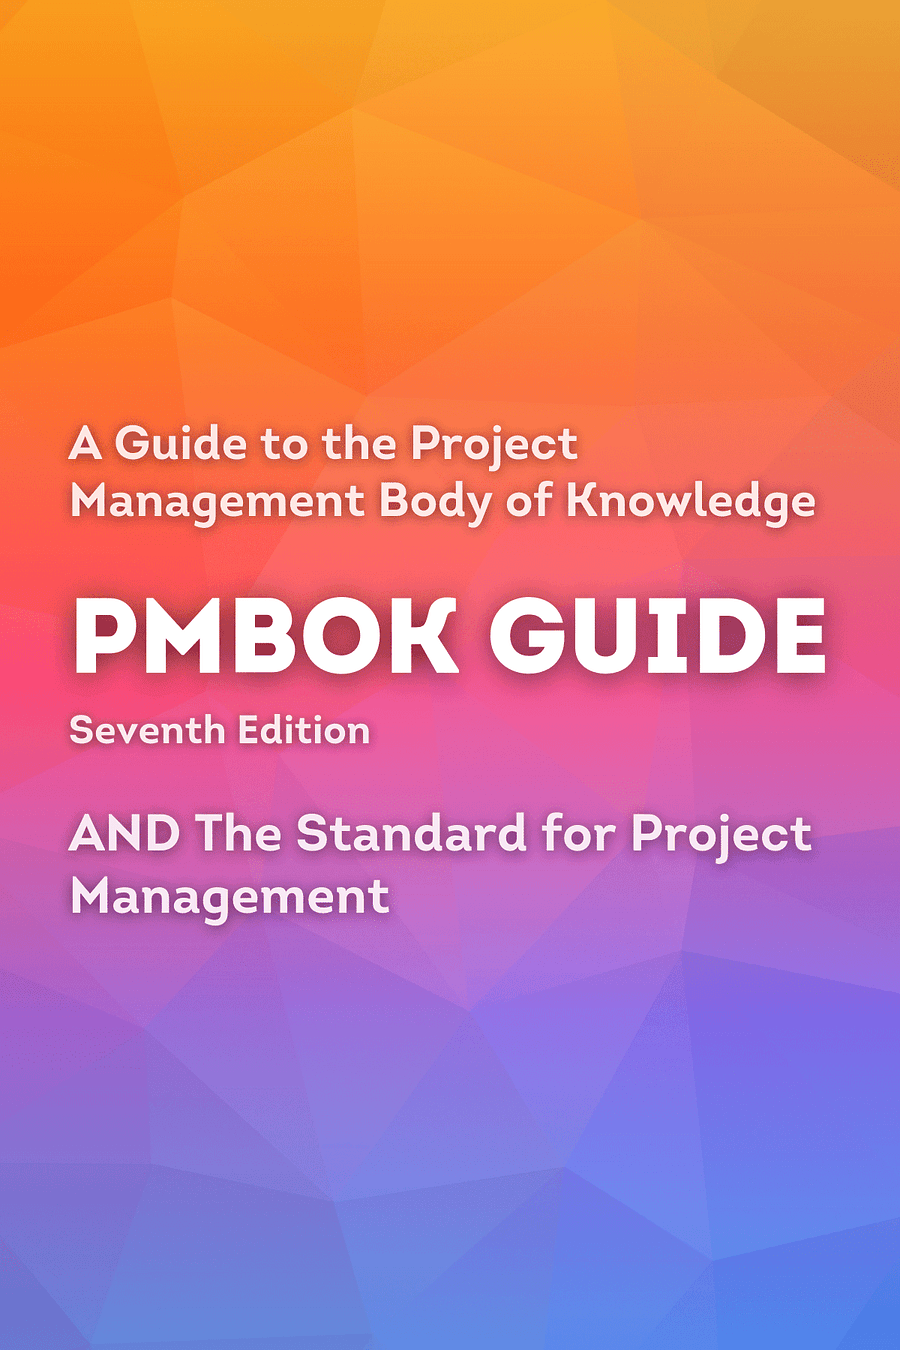 A Guide to the Project Management Body of Knowledge (PMBOK Guide) – Seventh Edition and The Standard for Project Management (ENGLISH) by Project Management Institute - Book Summary